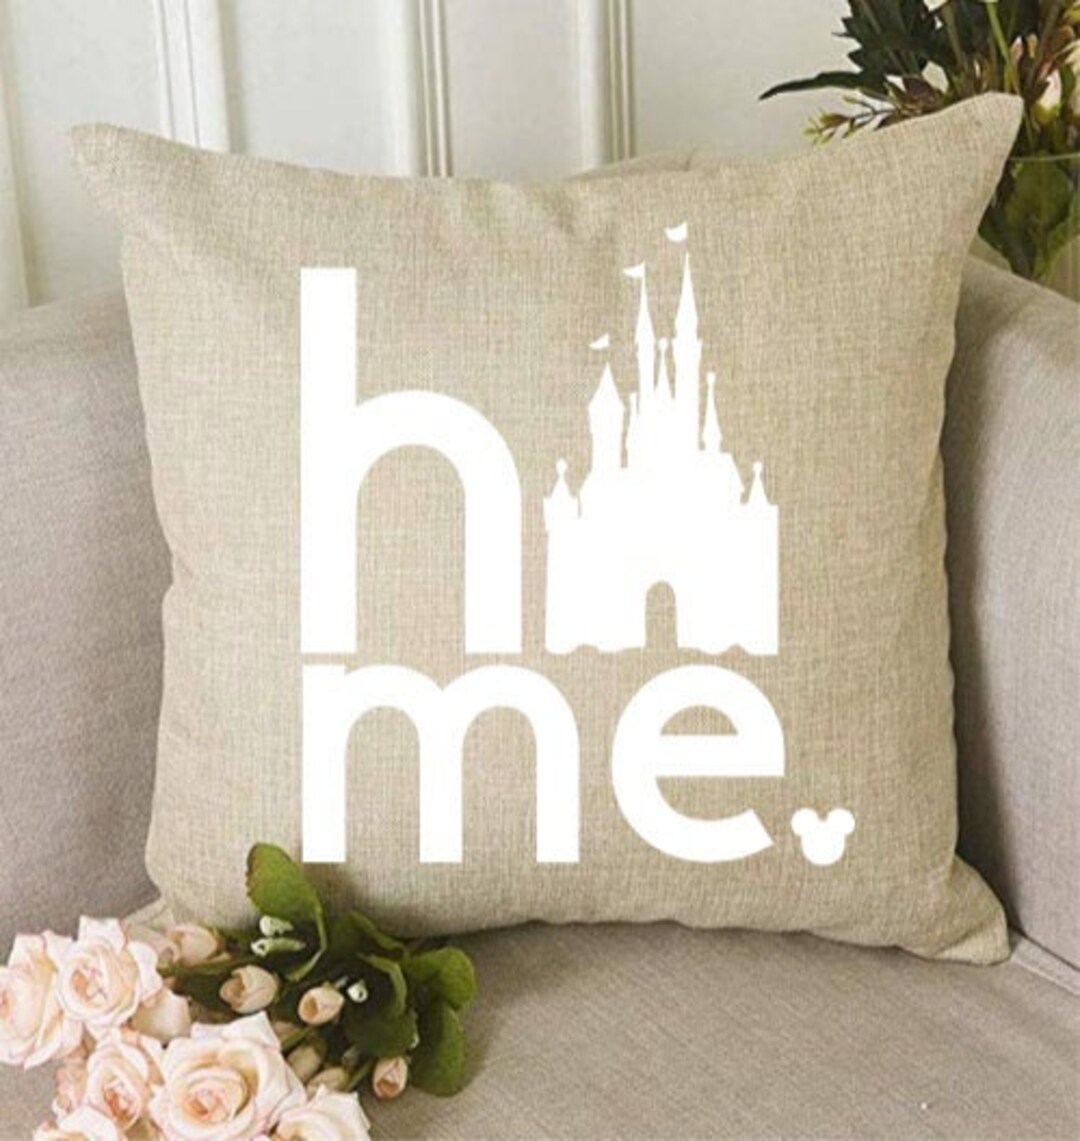 Love Disney Decor? You've Got to See These DISCOUNTED Pillow Covers